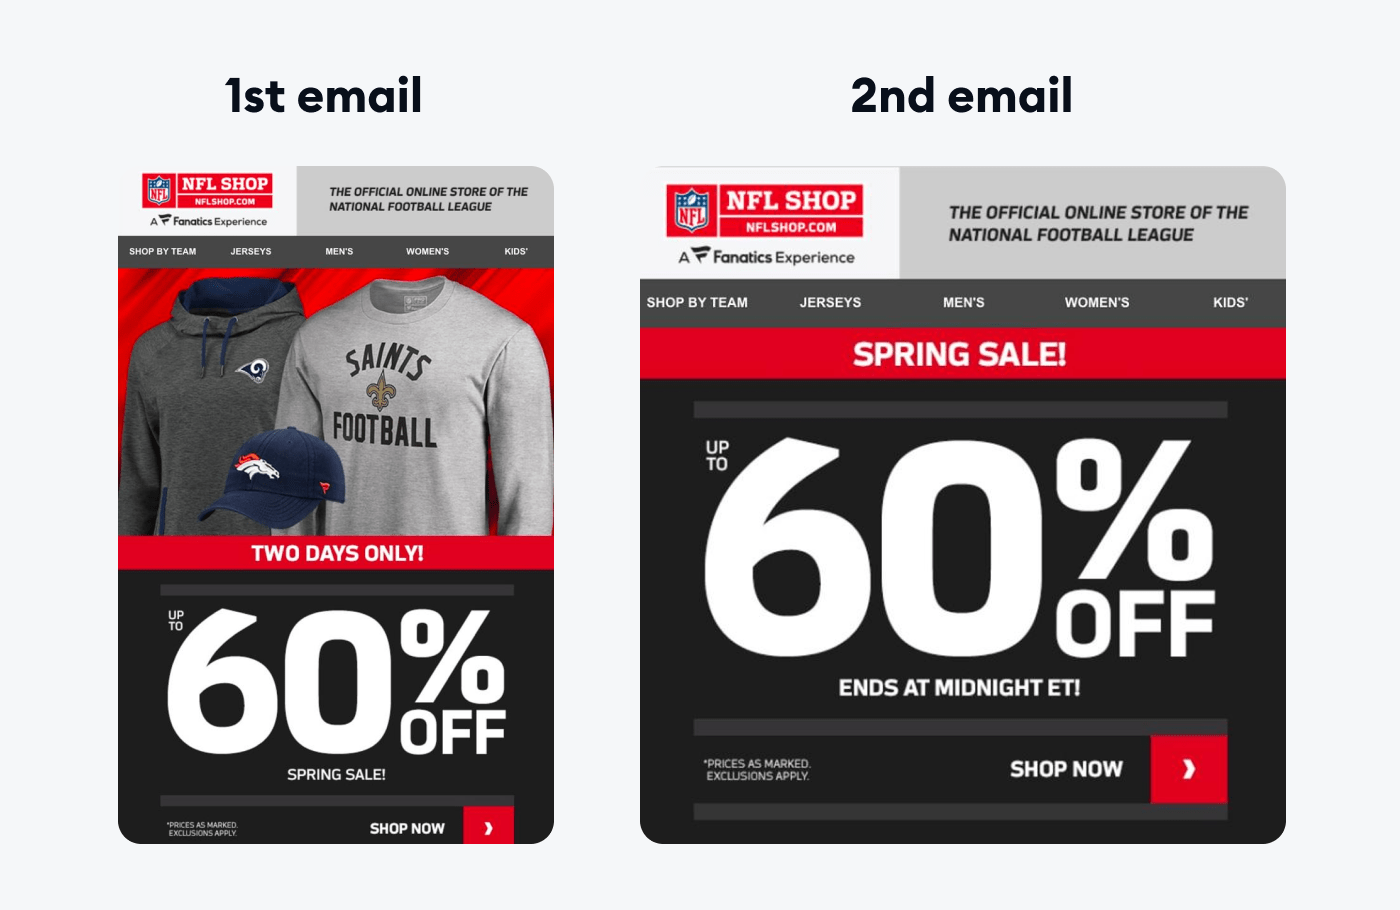 an email from the NFL shop announcing the Spring Sale